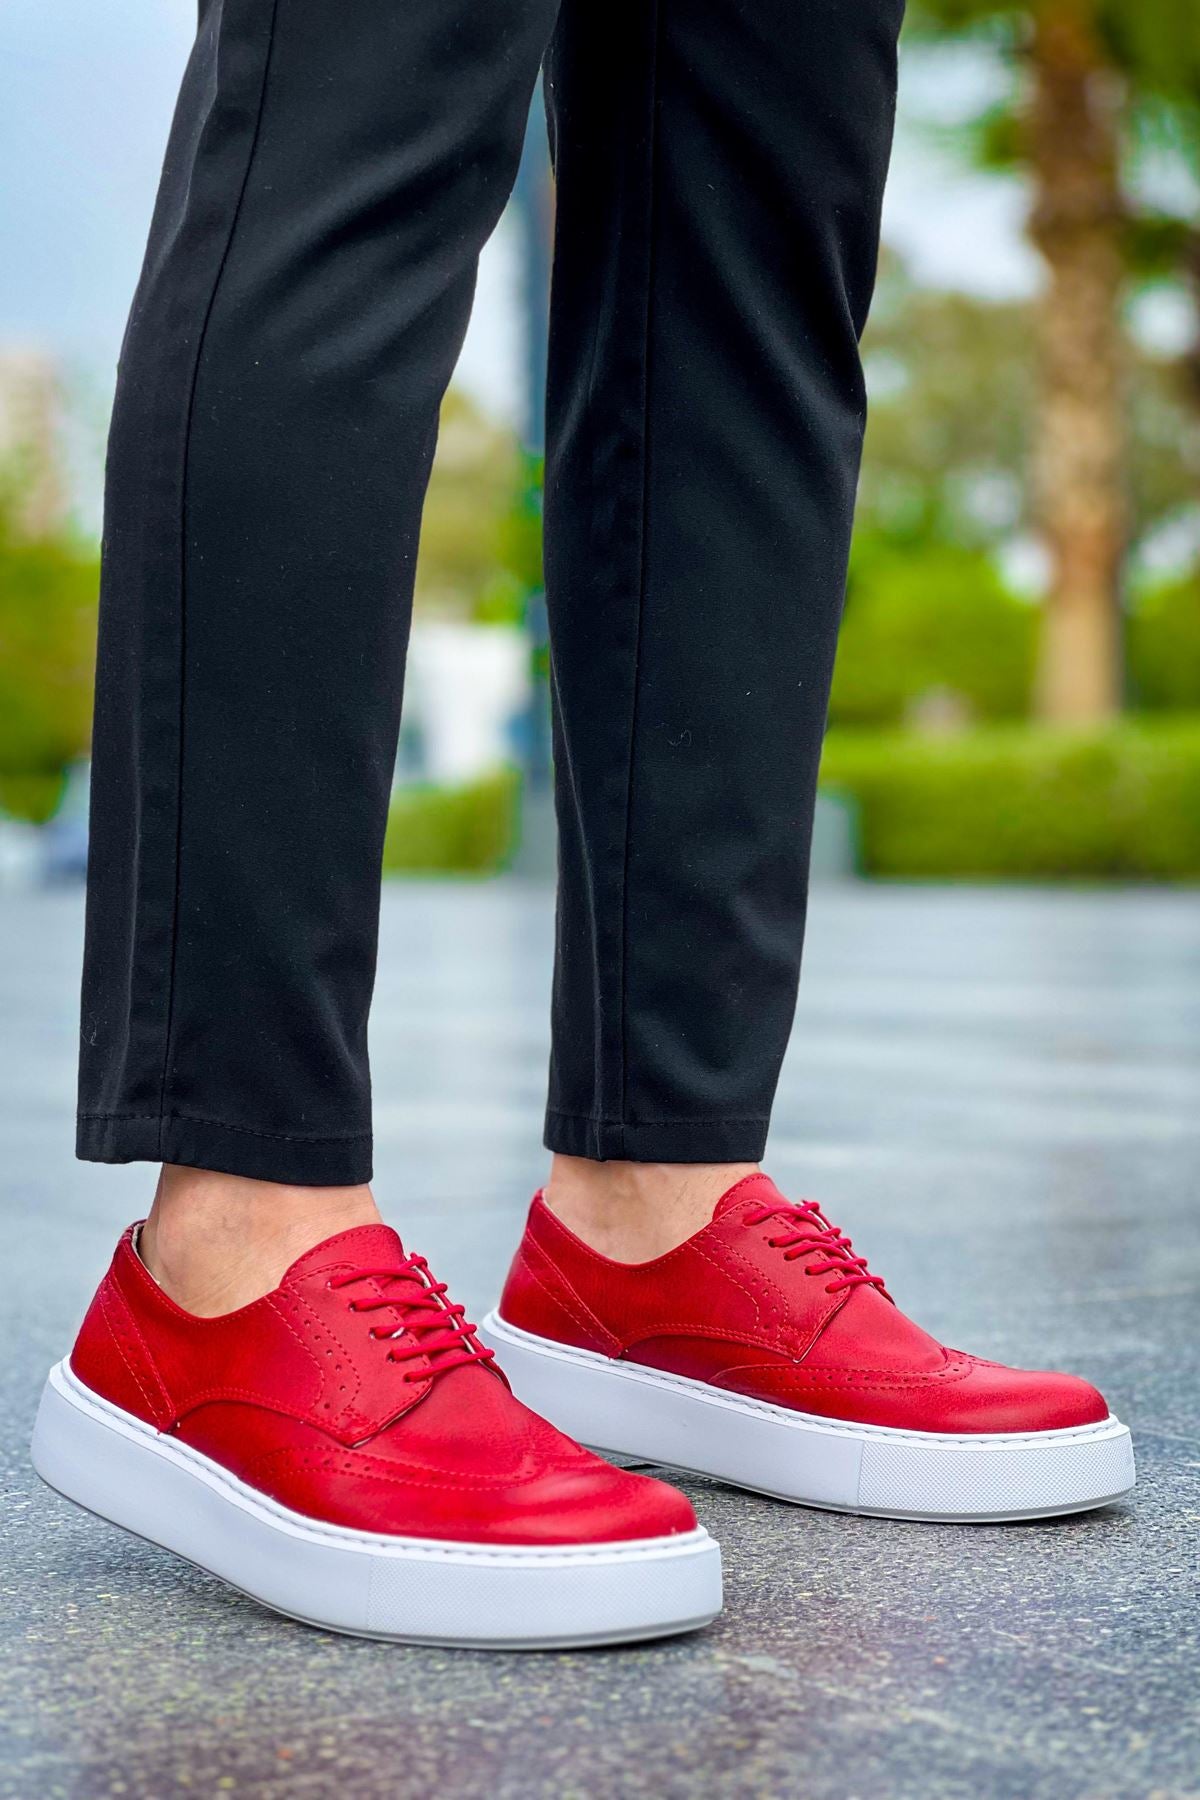 CH149 CBT Changer Over Men's sneakers Shoes RED - STREETMODE ™